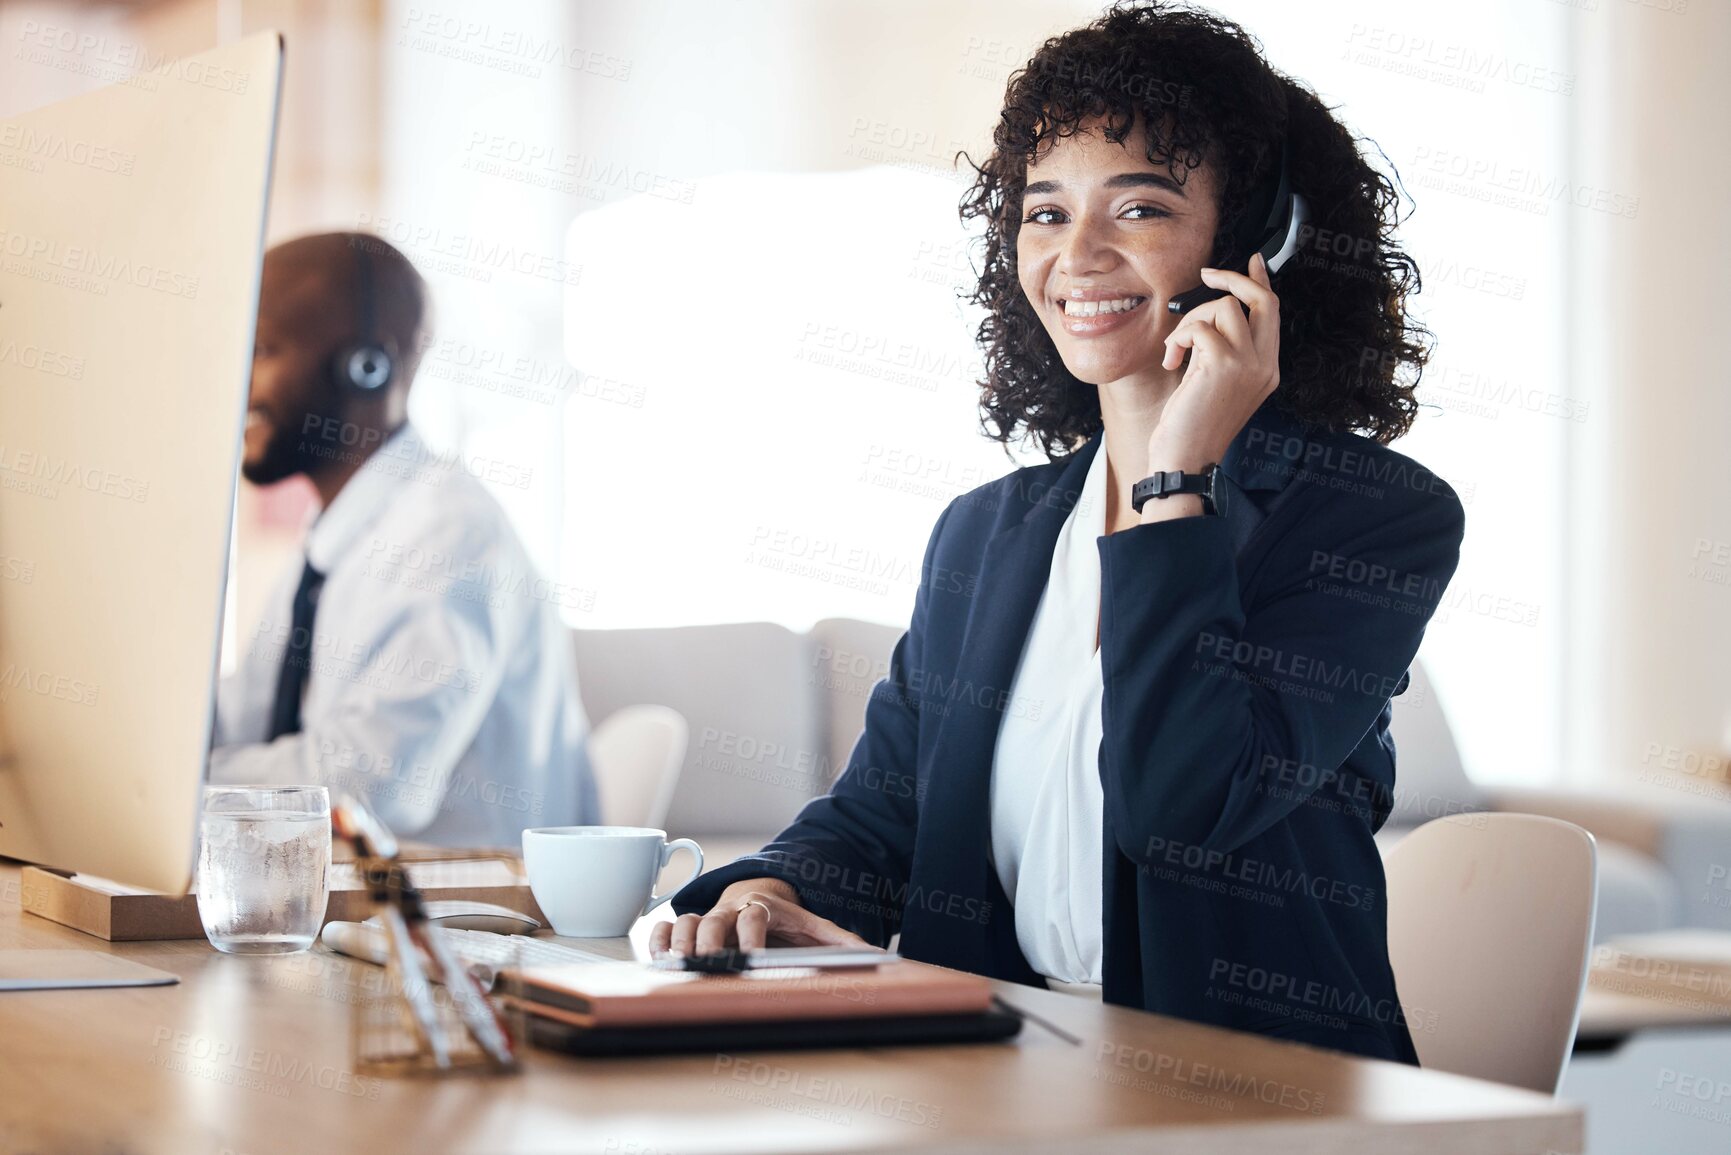 Buy stock photo Crm, call center and black woman portrait of a lead generation worker on a office call. Customer service, web support and contact us employee with a smile from online consulting job and career